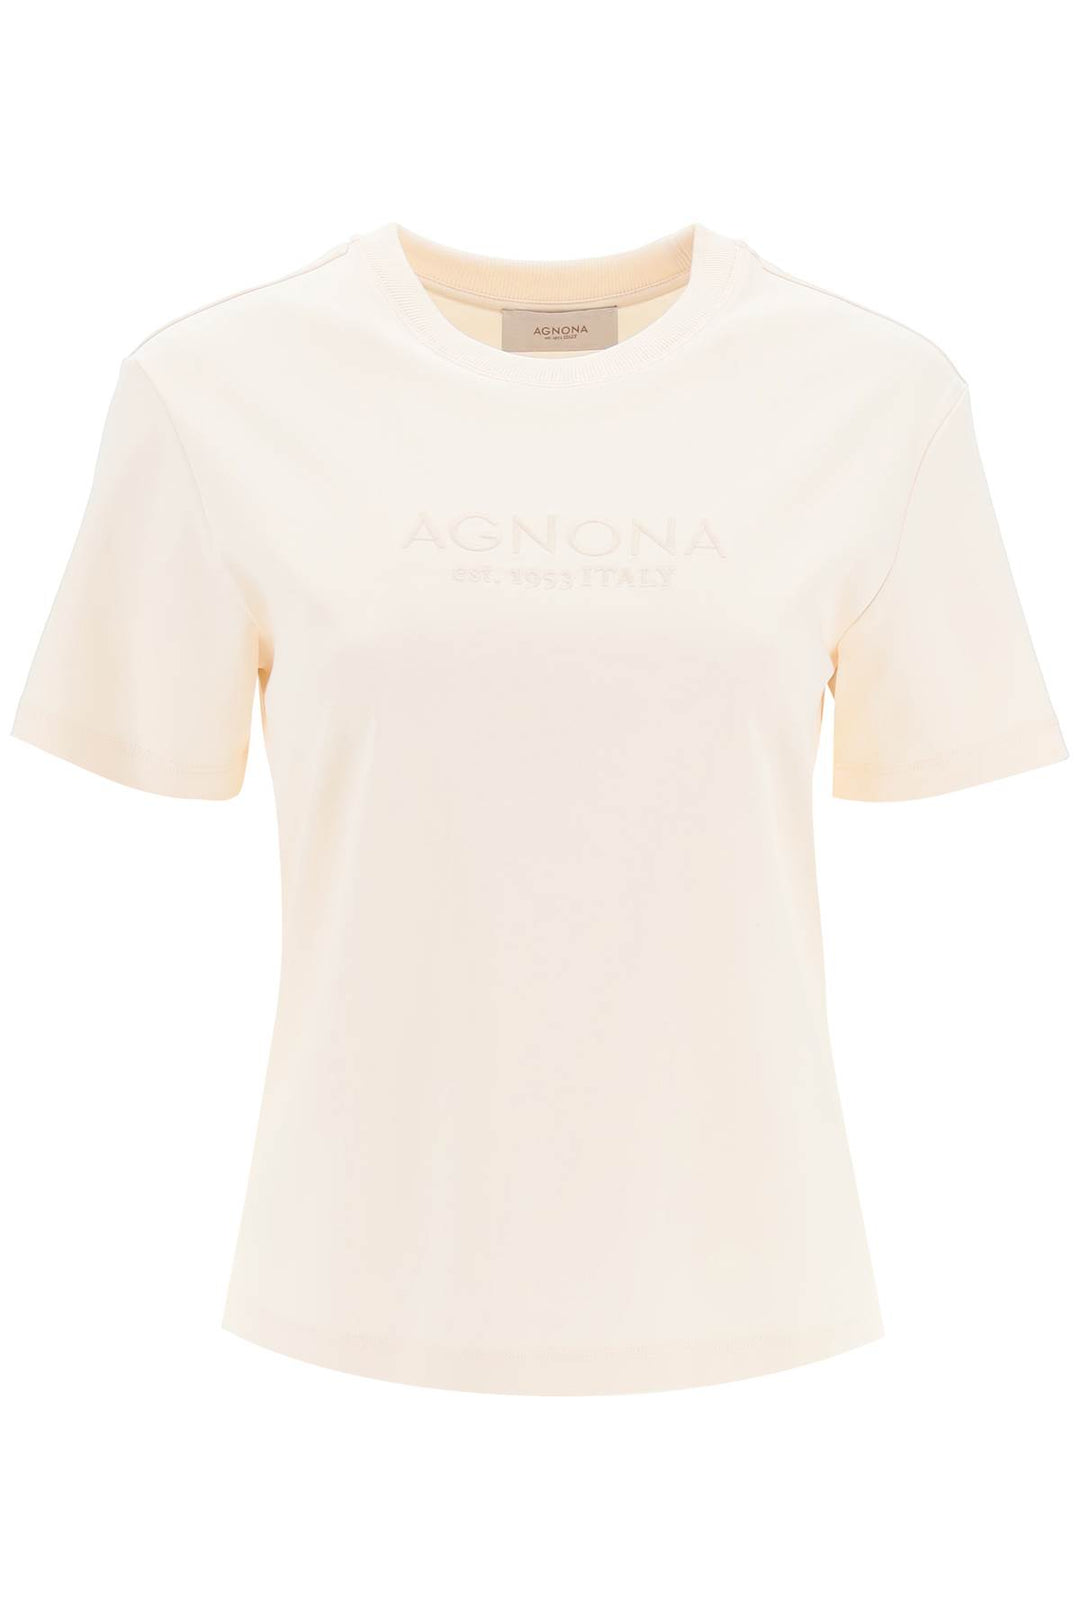 Agnona t-shirt with embroidered logo-0